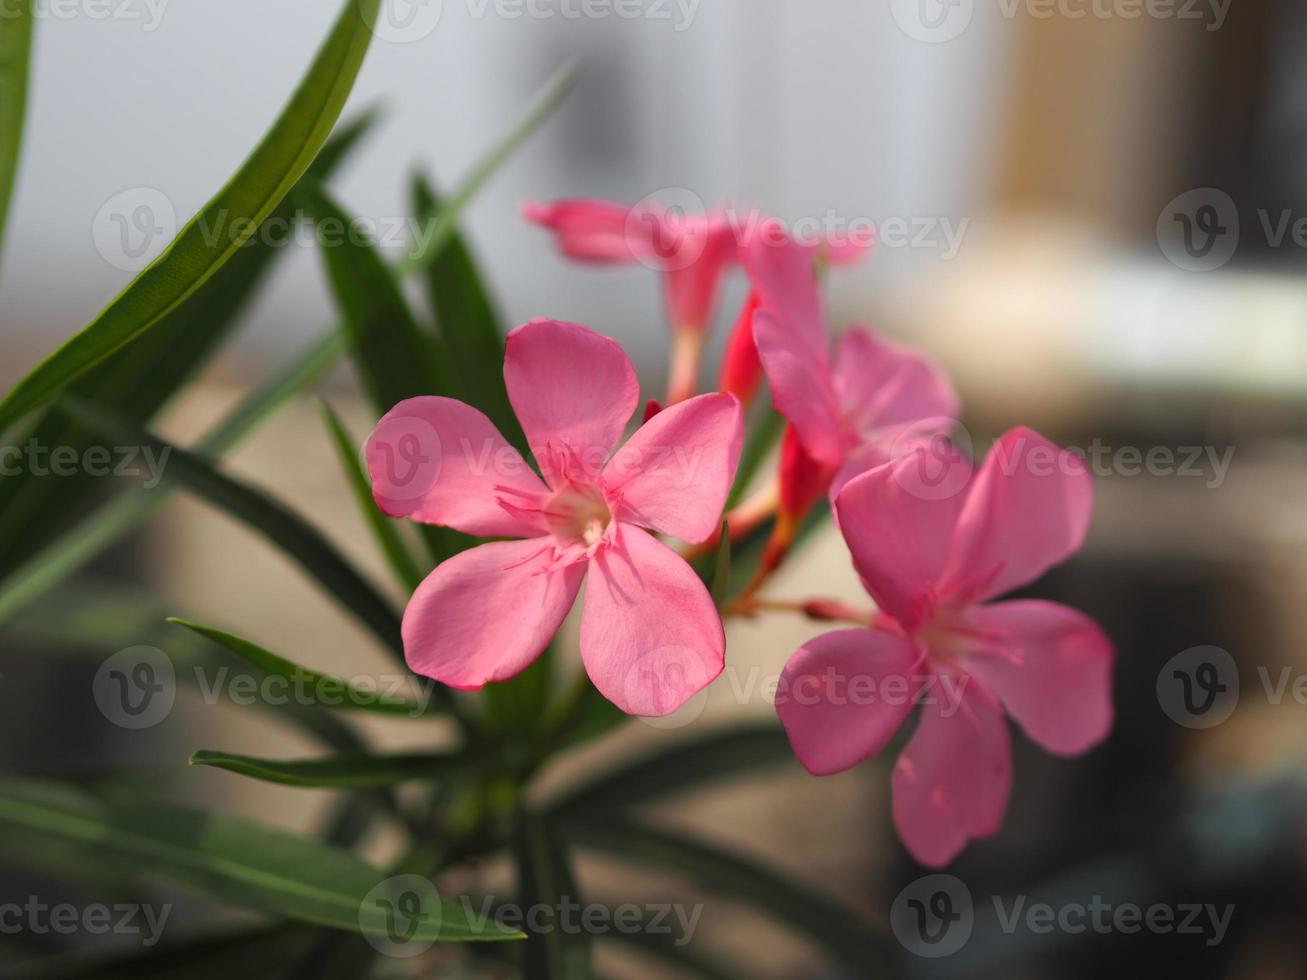 Sweet Oleander, Rose Bay, Nerium oleander name pink flower tree in garden on blurred of nature background, leaves are single oval shape, The tip and the base of the pointed smooth not thick hard photo